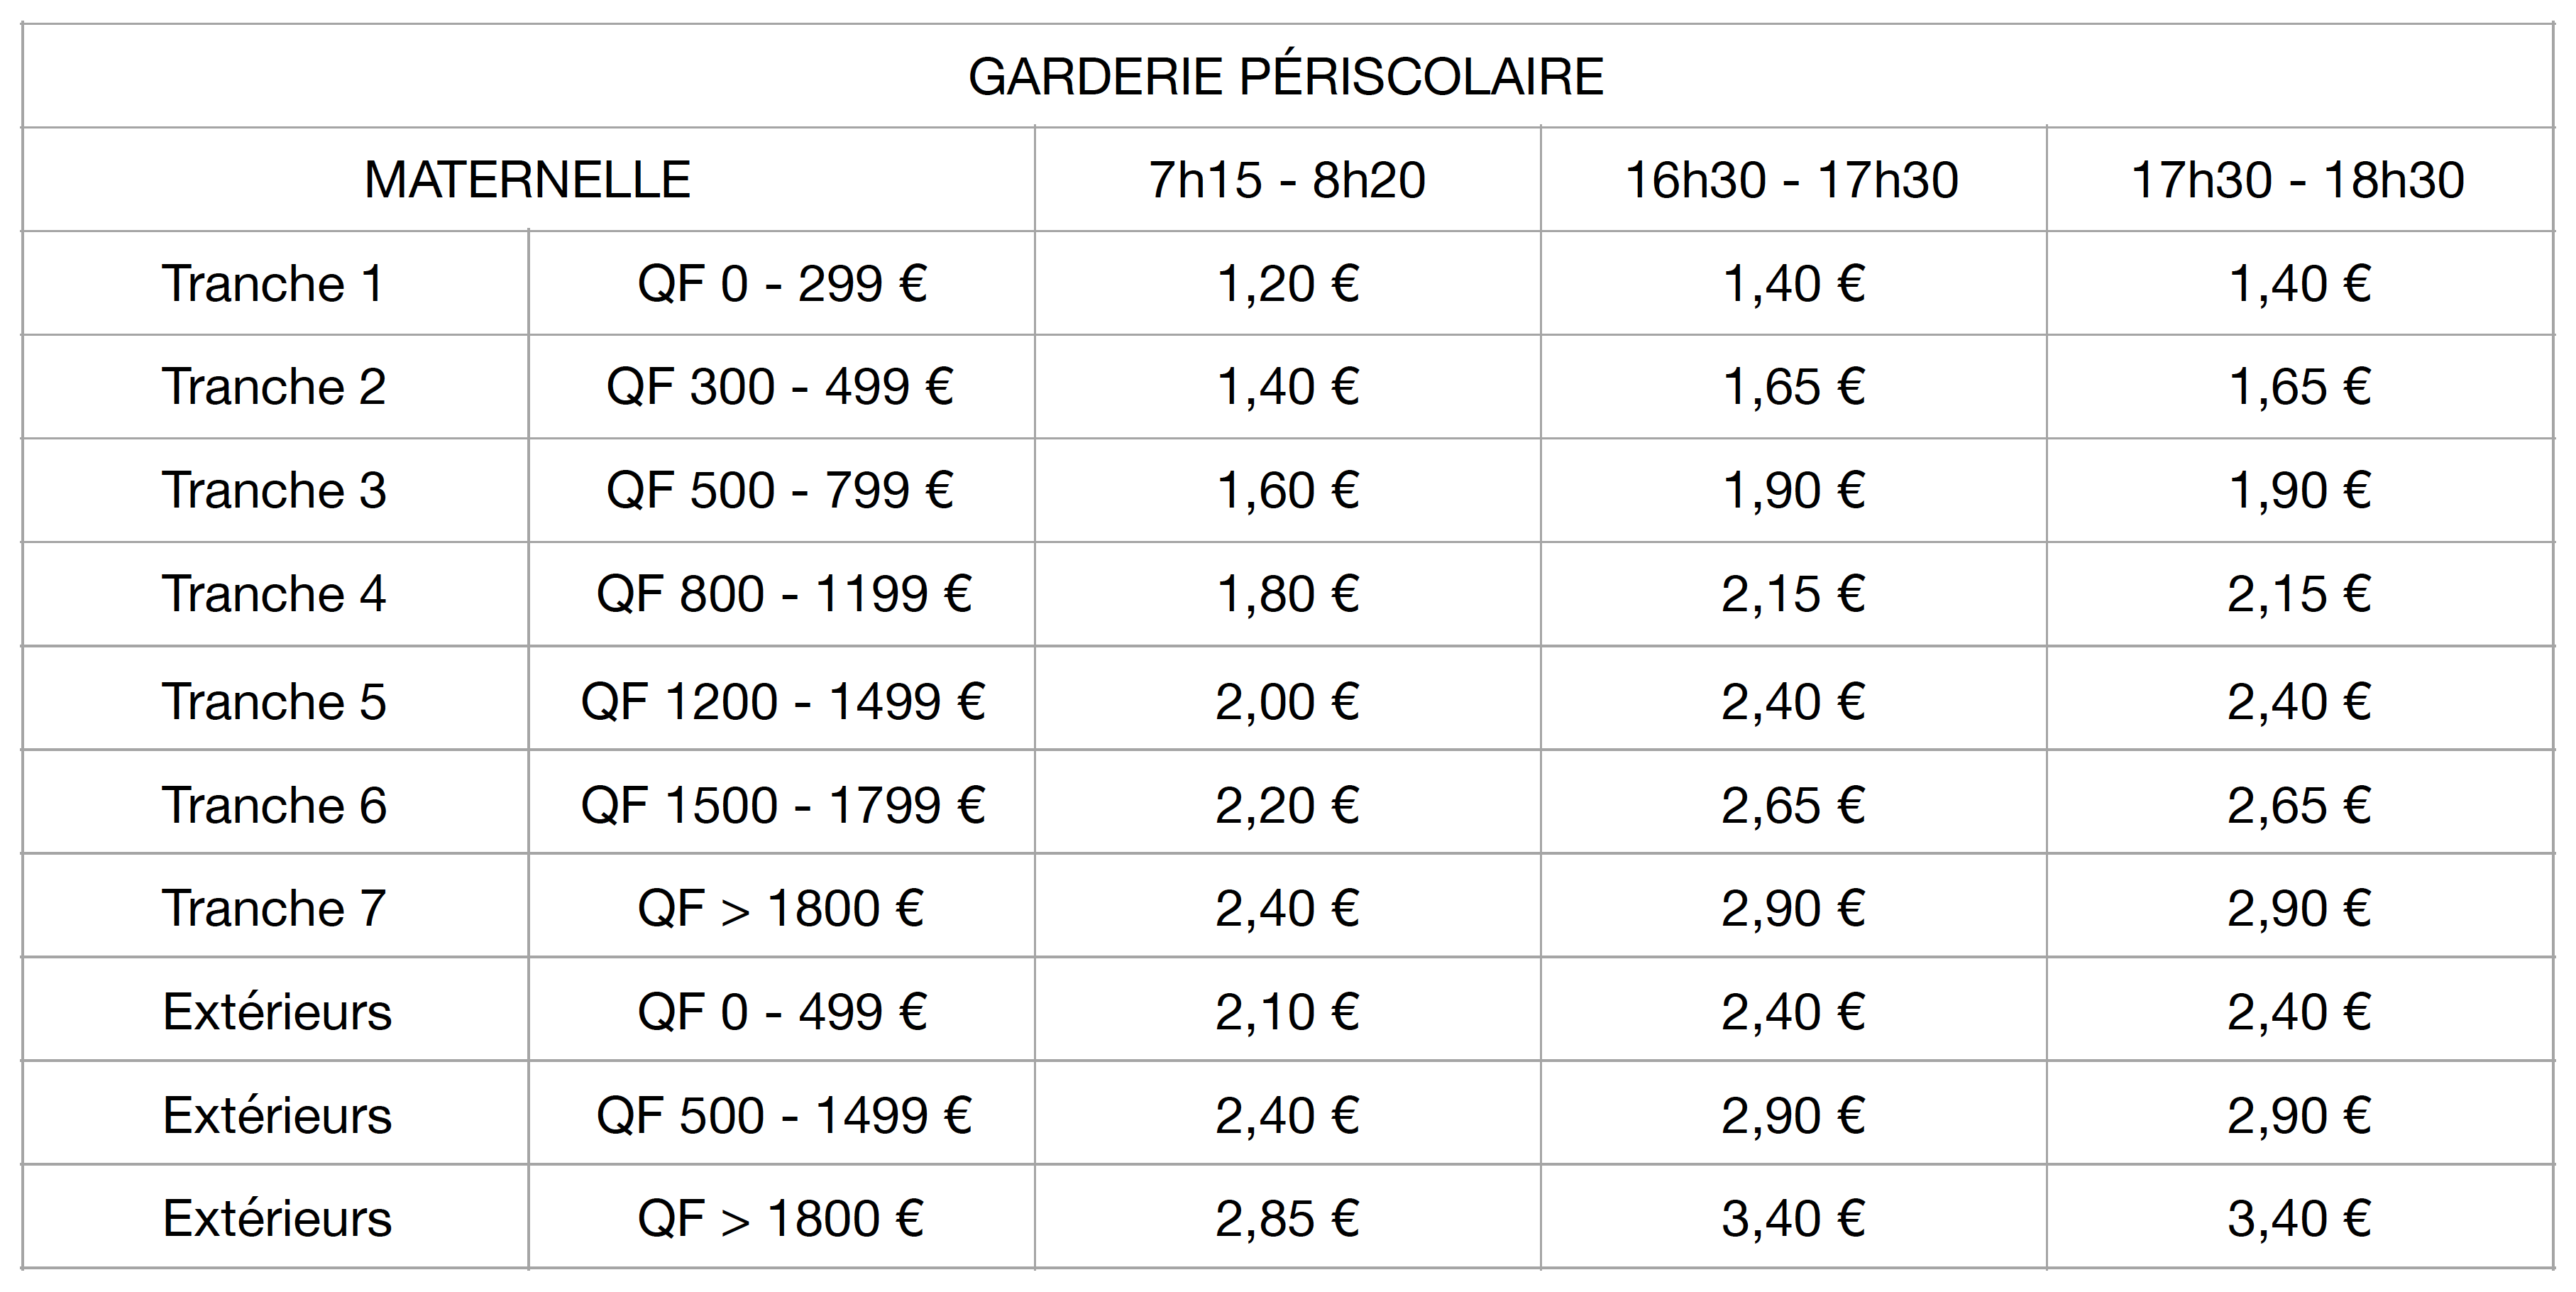 Tarifs garderie periscolaire M 2022.png